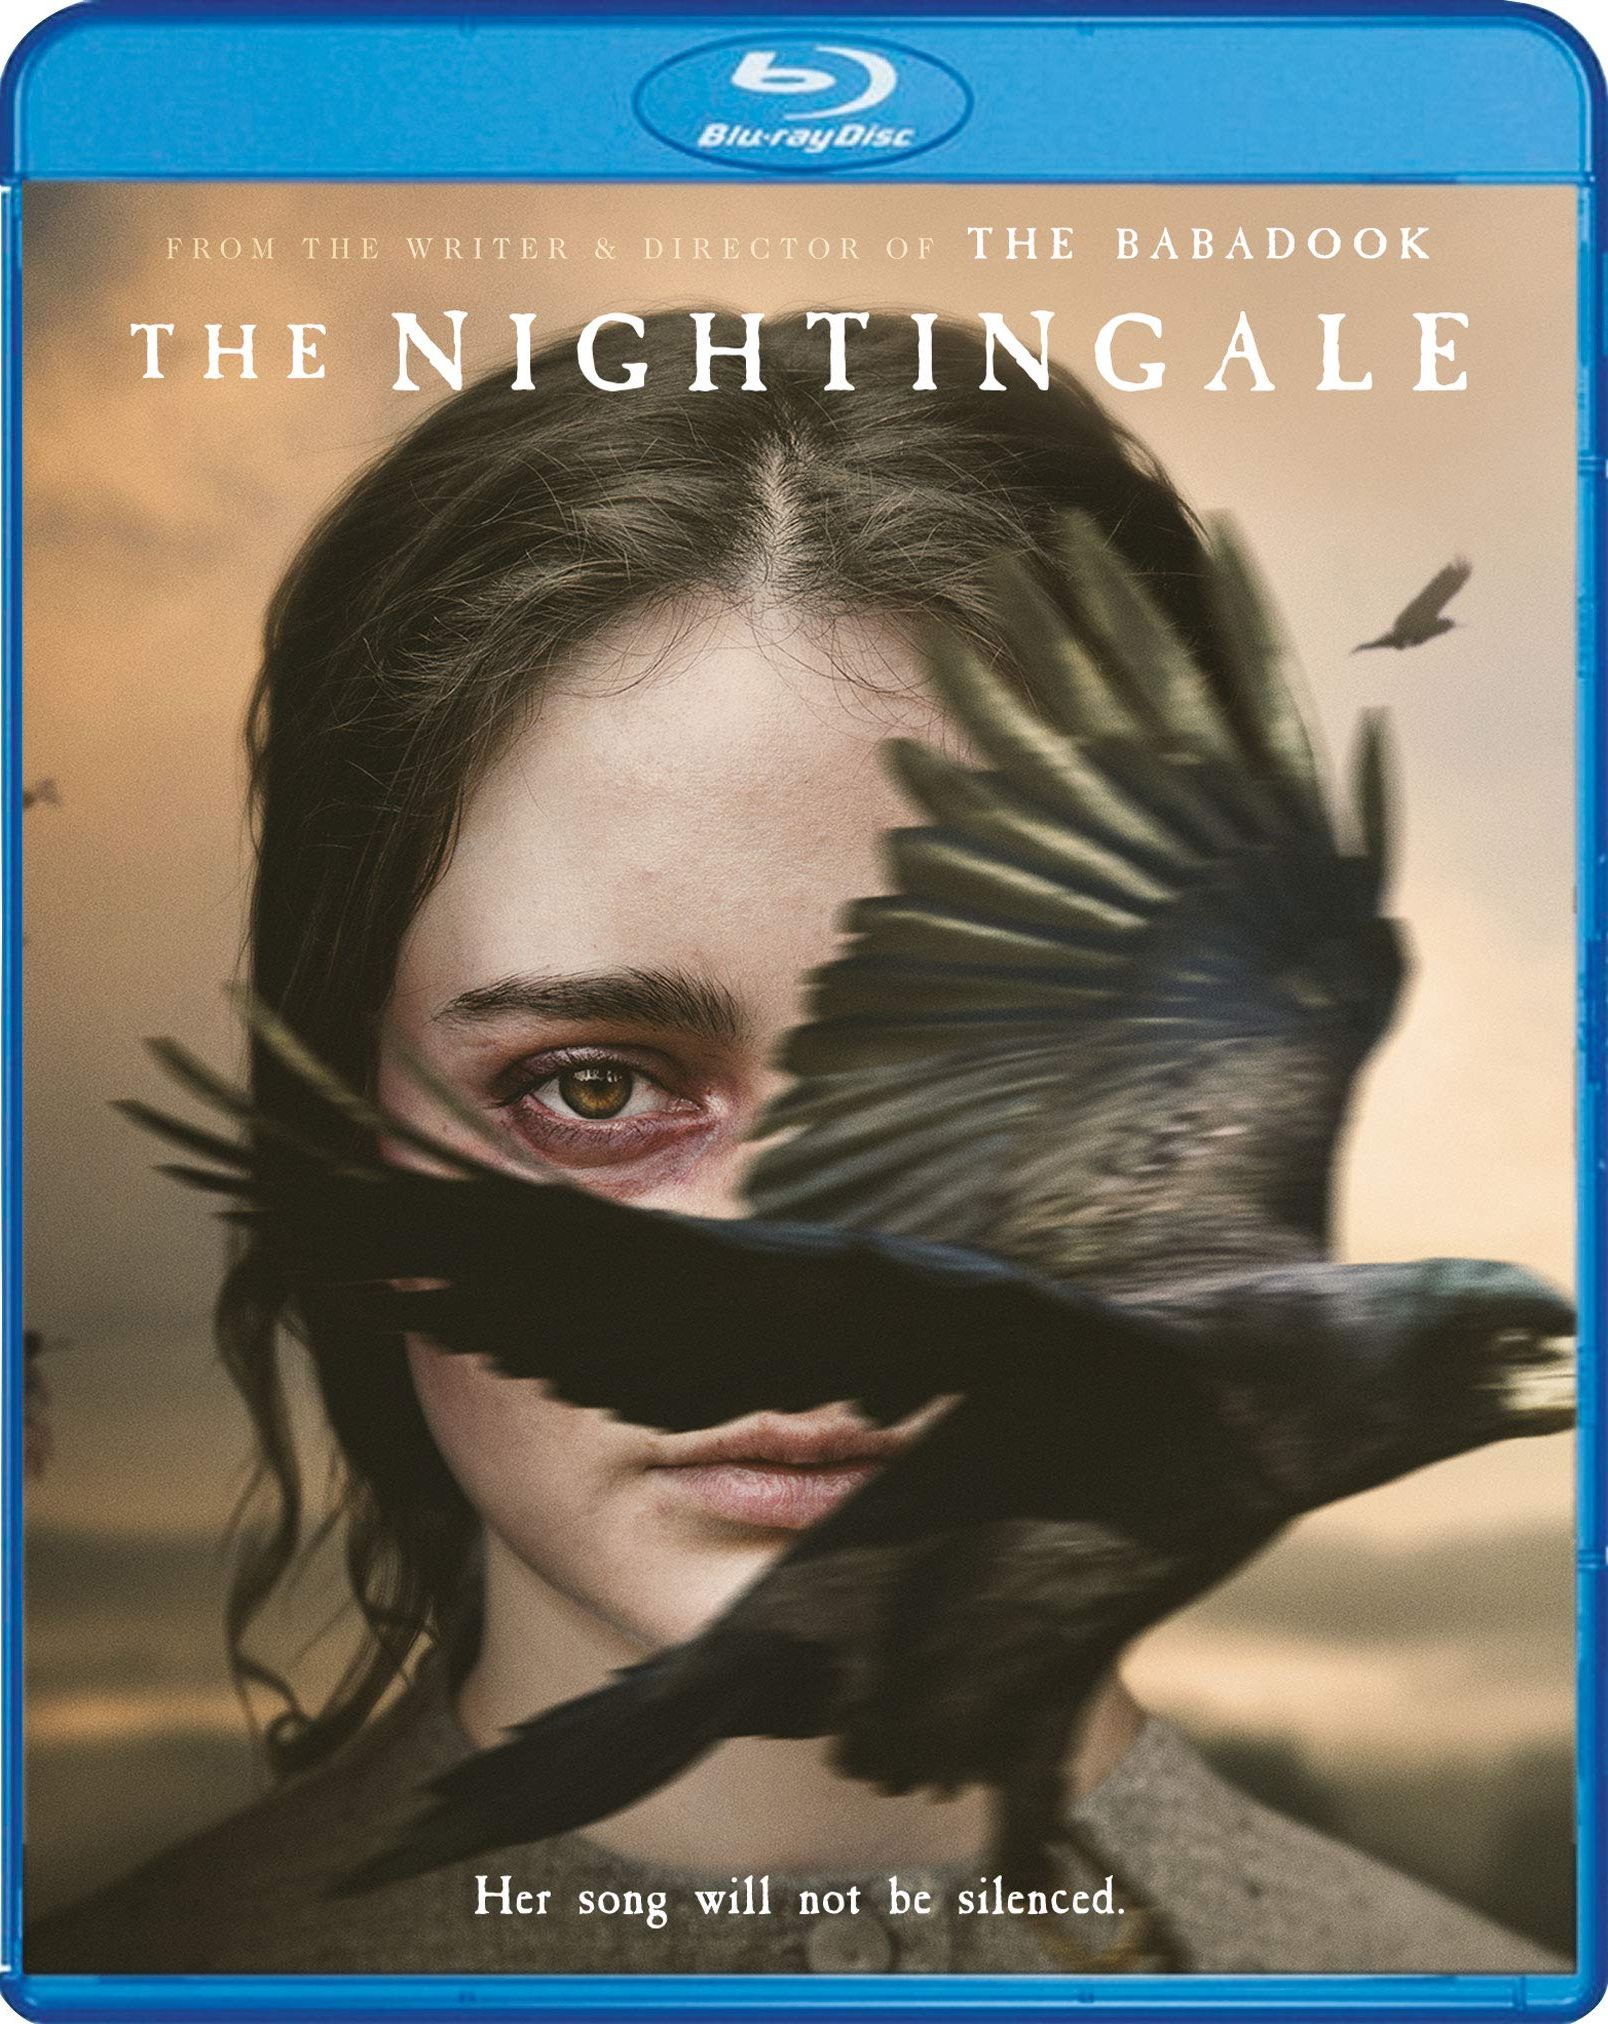 The Nightingale DVD Release Date February 4, 2020